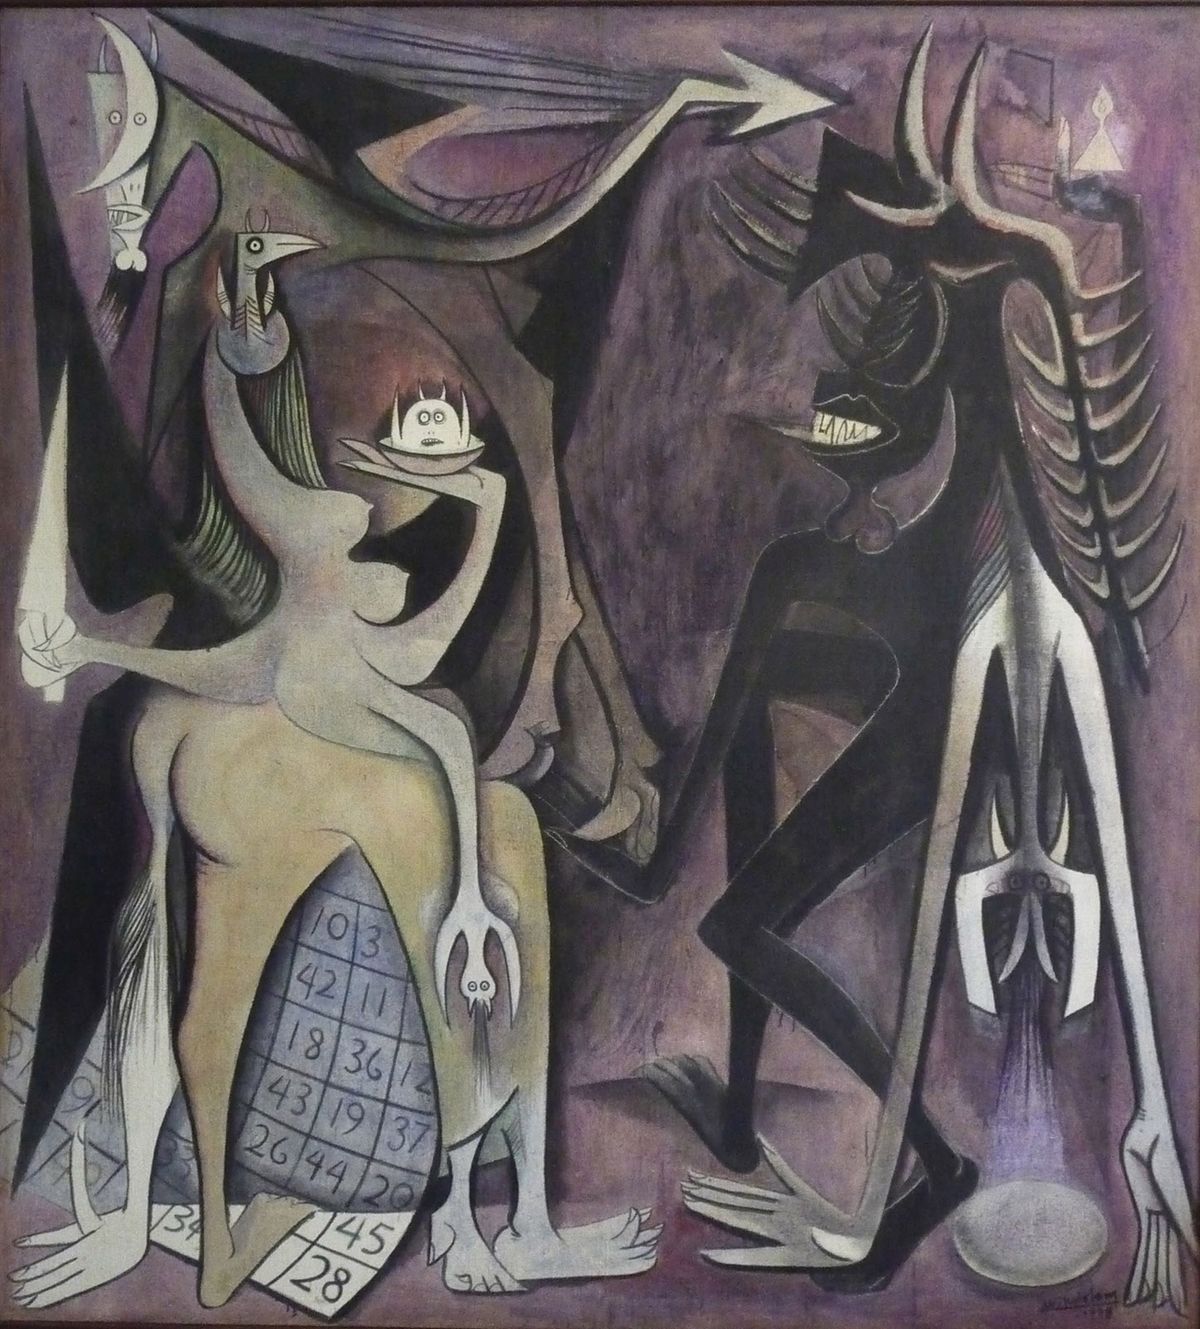 Emperor of the Flies (1948) by the Cuban-born Chinese African Surrealist, Wifredo Lam. Mitter points out that such artists have frequently been confined to the margins and dismissed as derivative by the Western art world